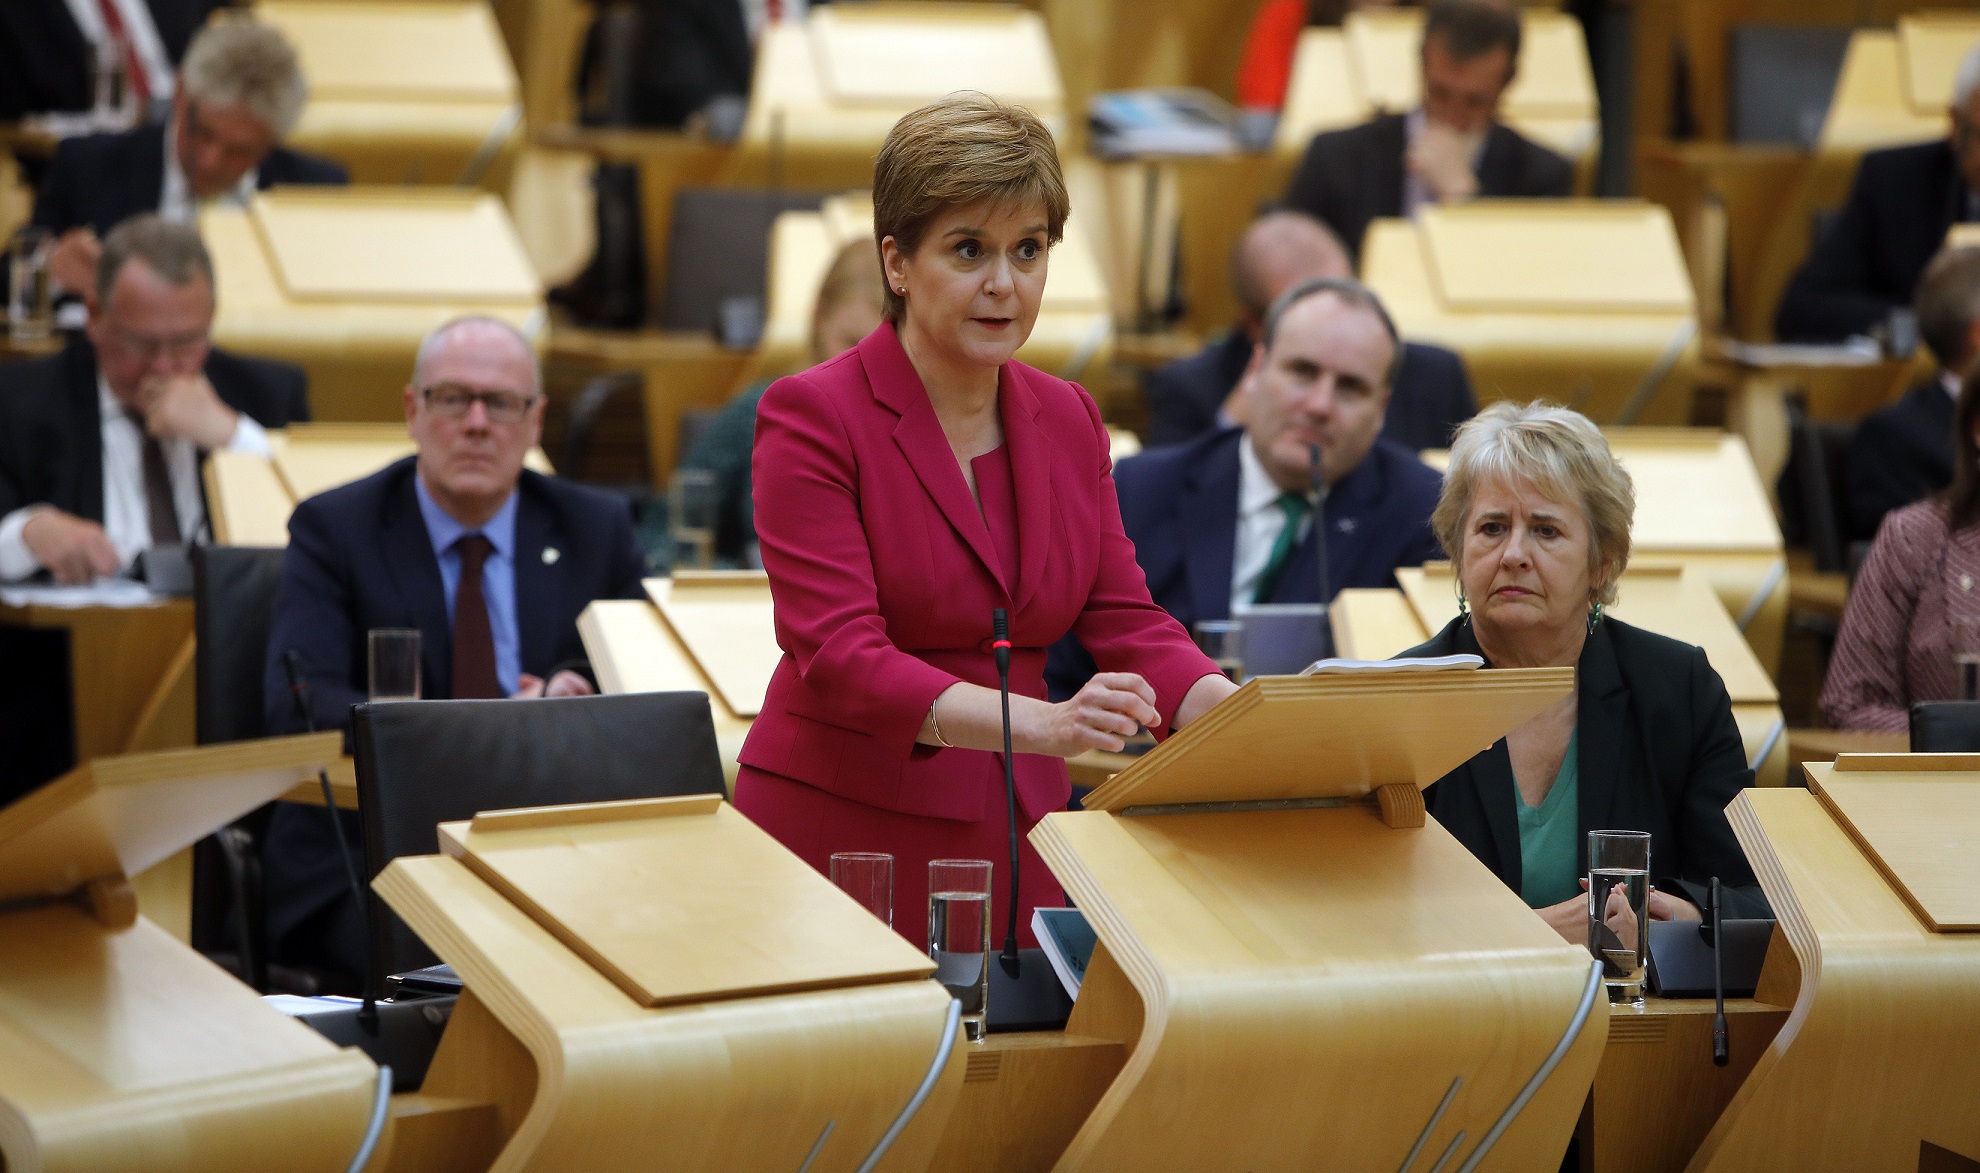 Mhairi Black said Nicola Sturgeo's resignations did not play a role in her stepping down.